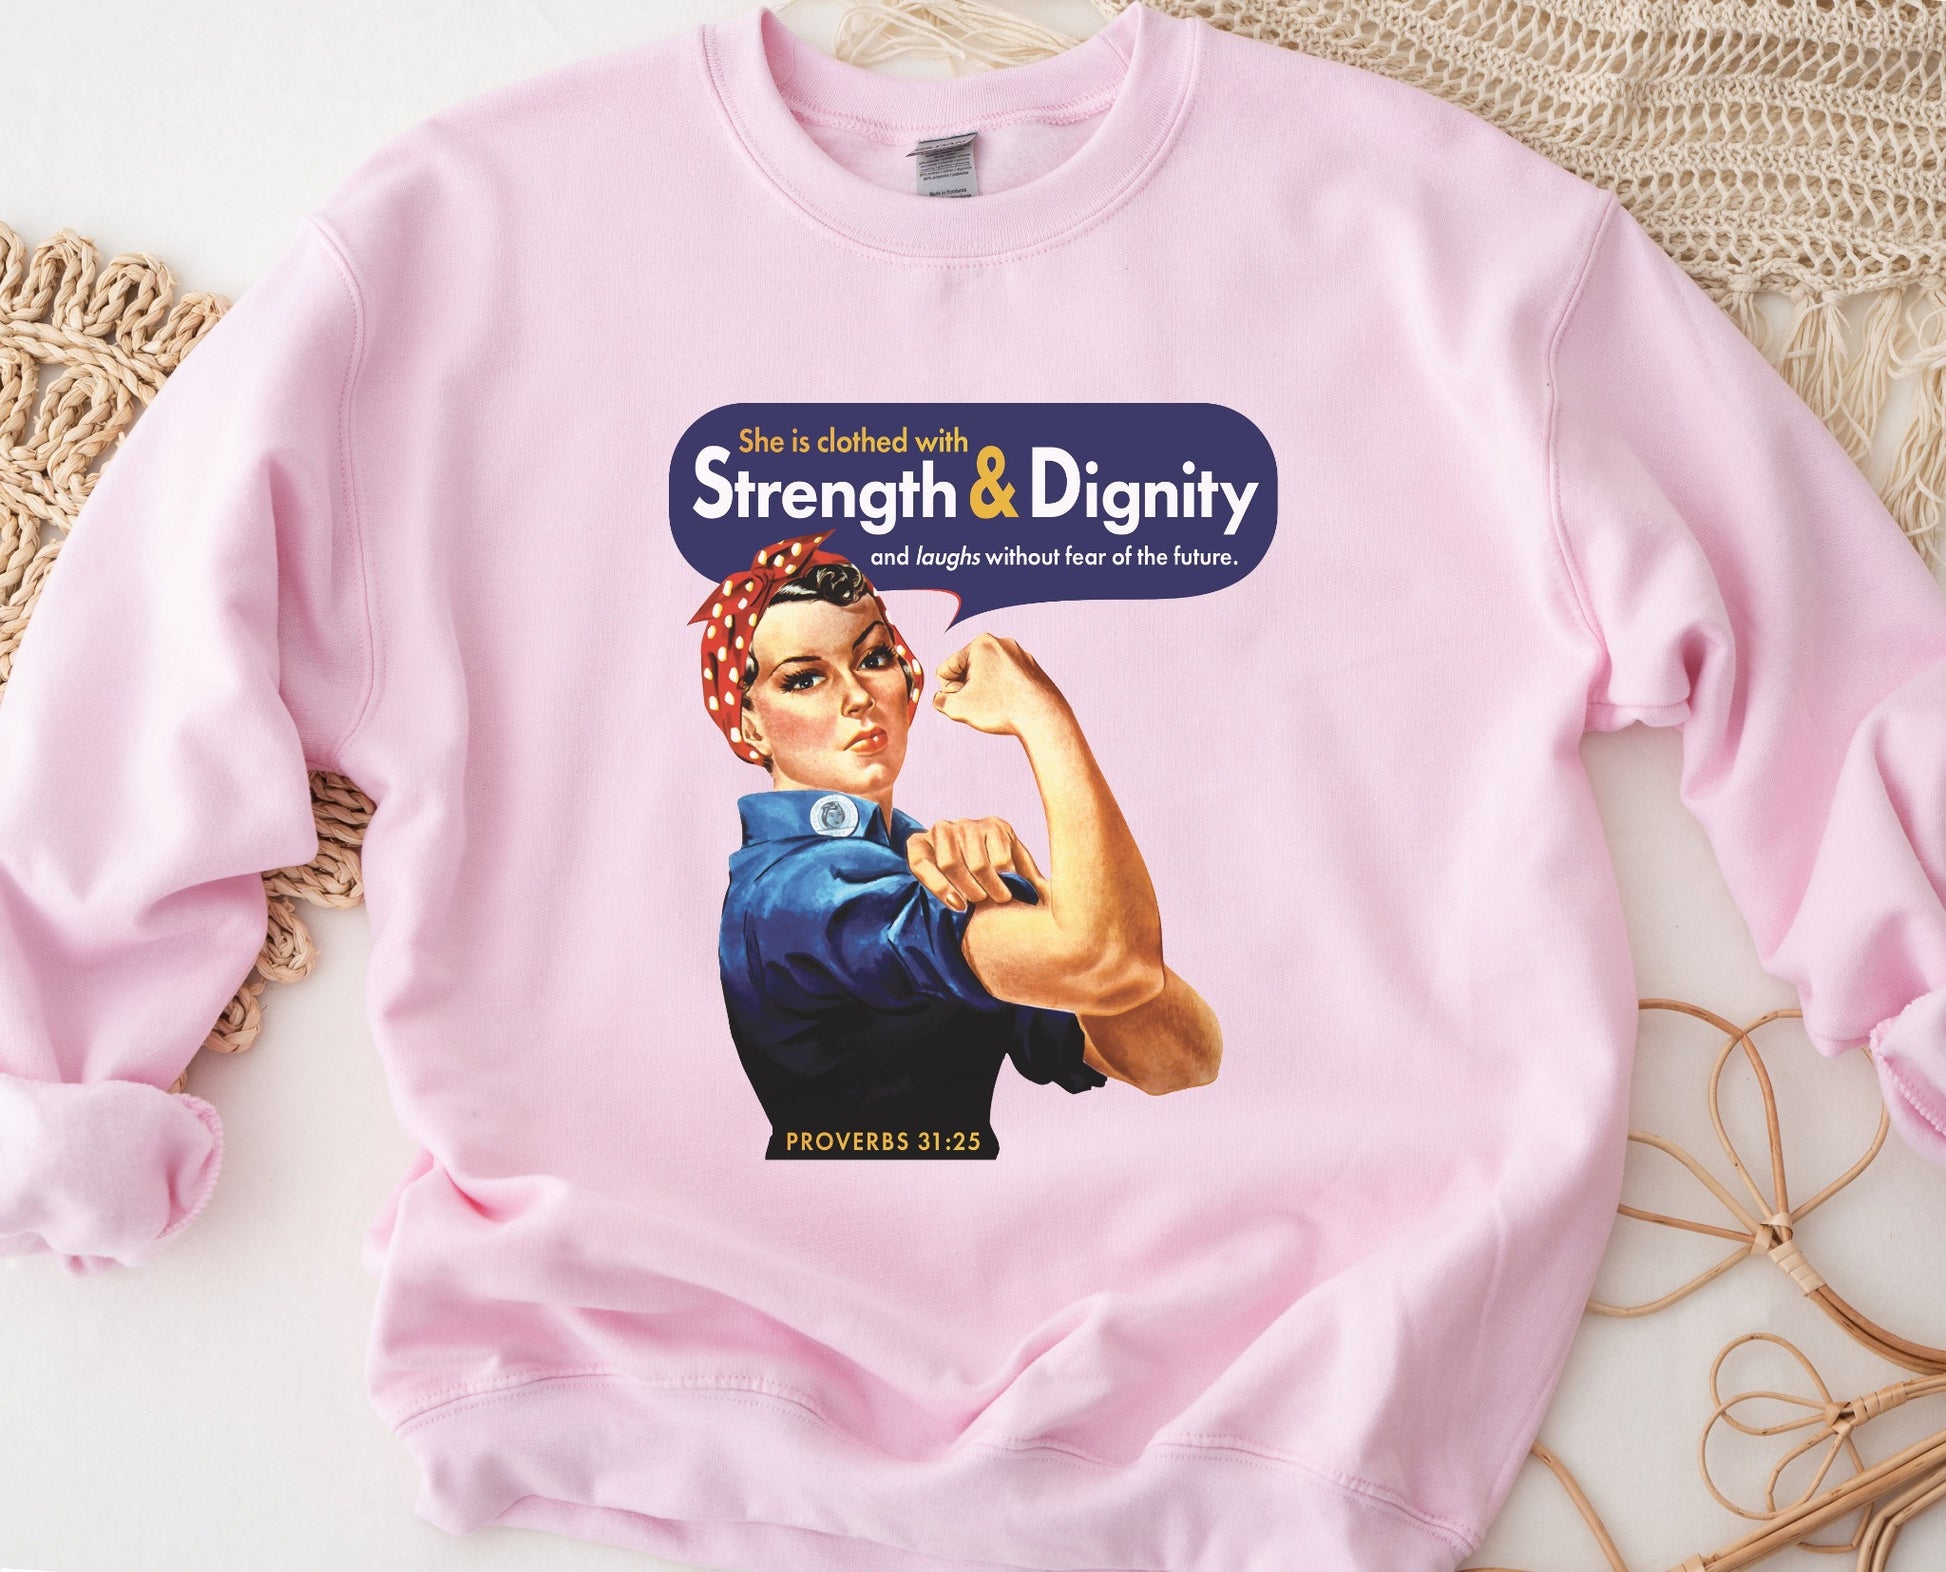 Rosie the Riveter Proverbs 31 Woman Christian aesthetic with iconic vintage female muscle design printed in red gold and navy blue on cozy light pink unisex crewneck sweatshirt for women